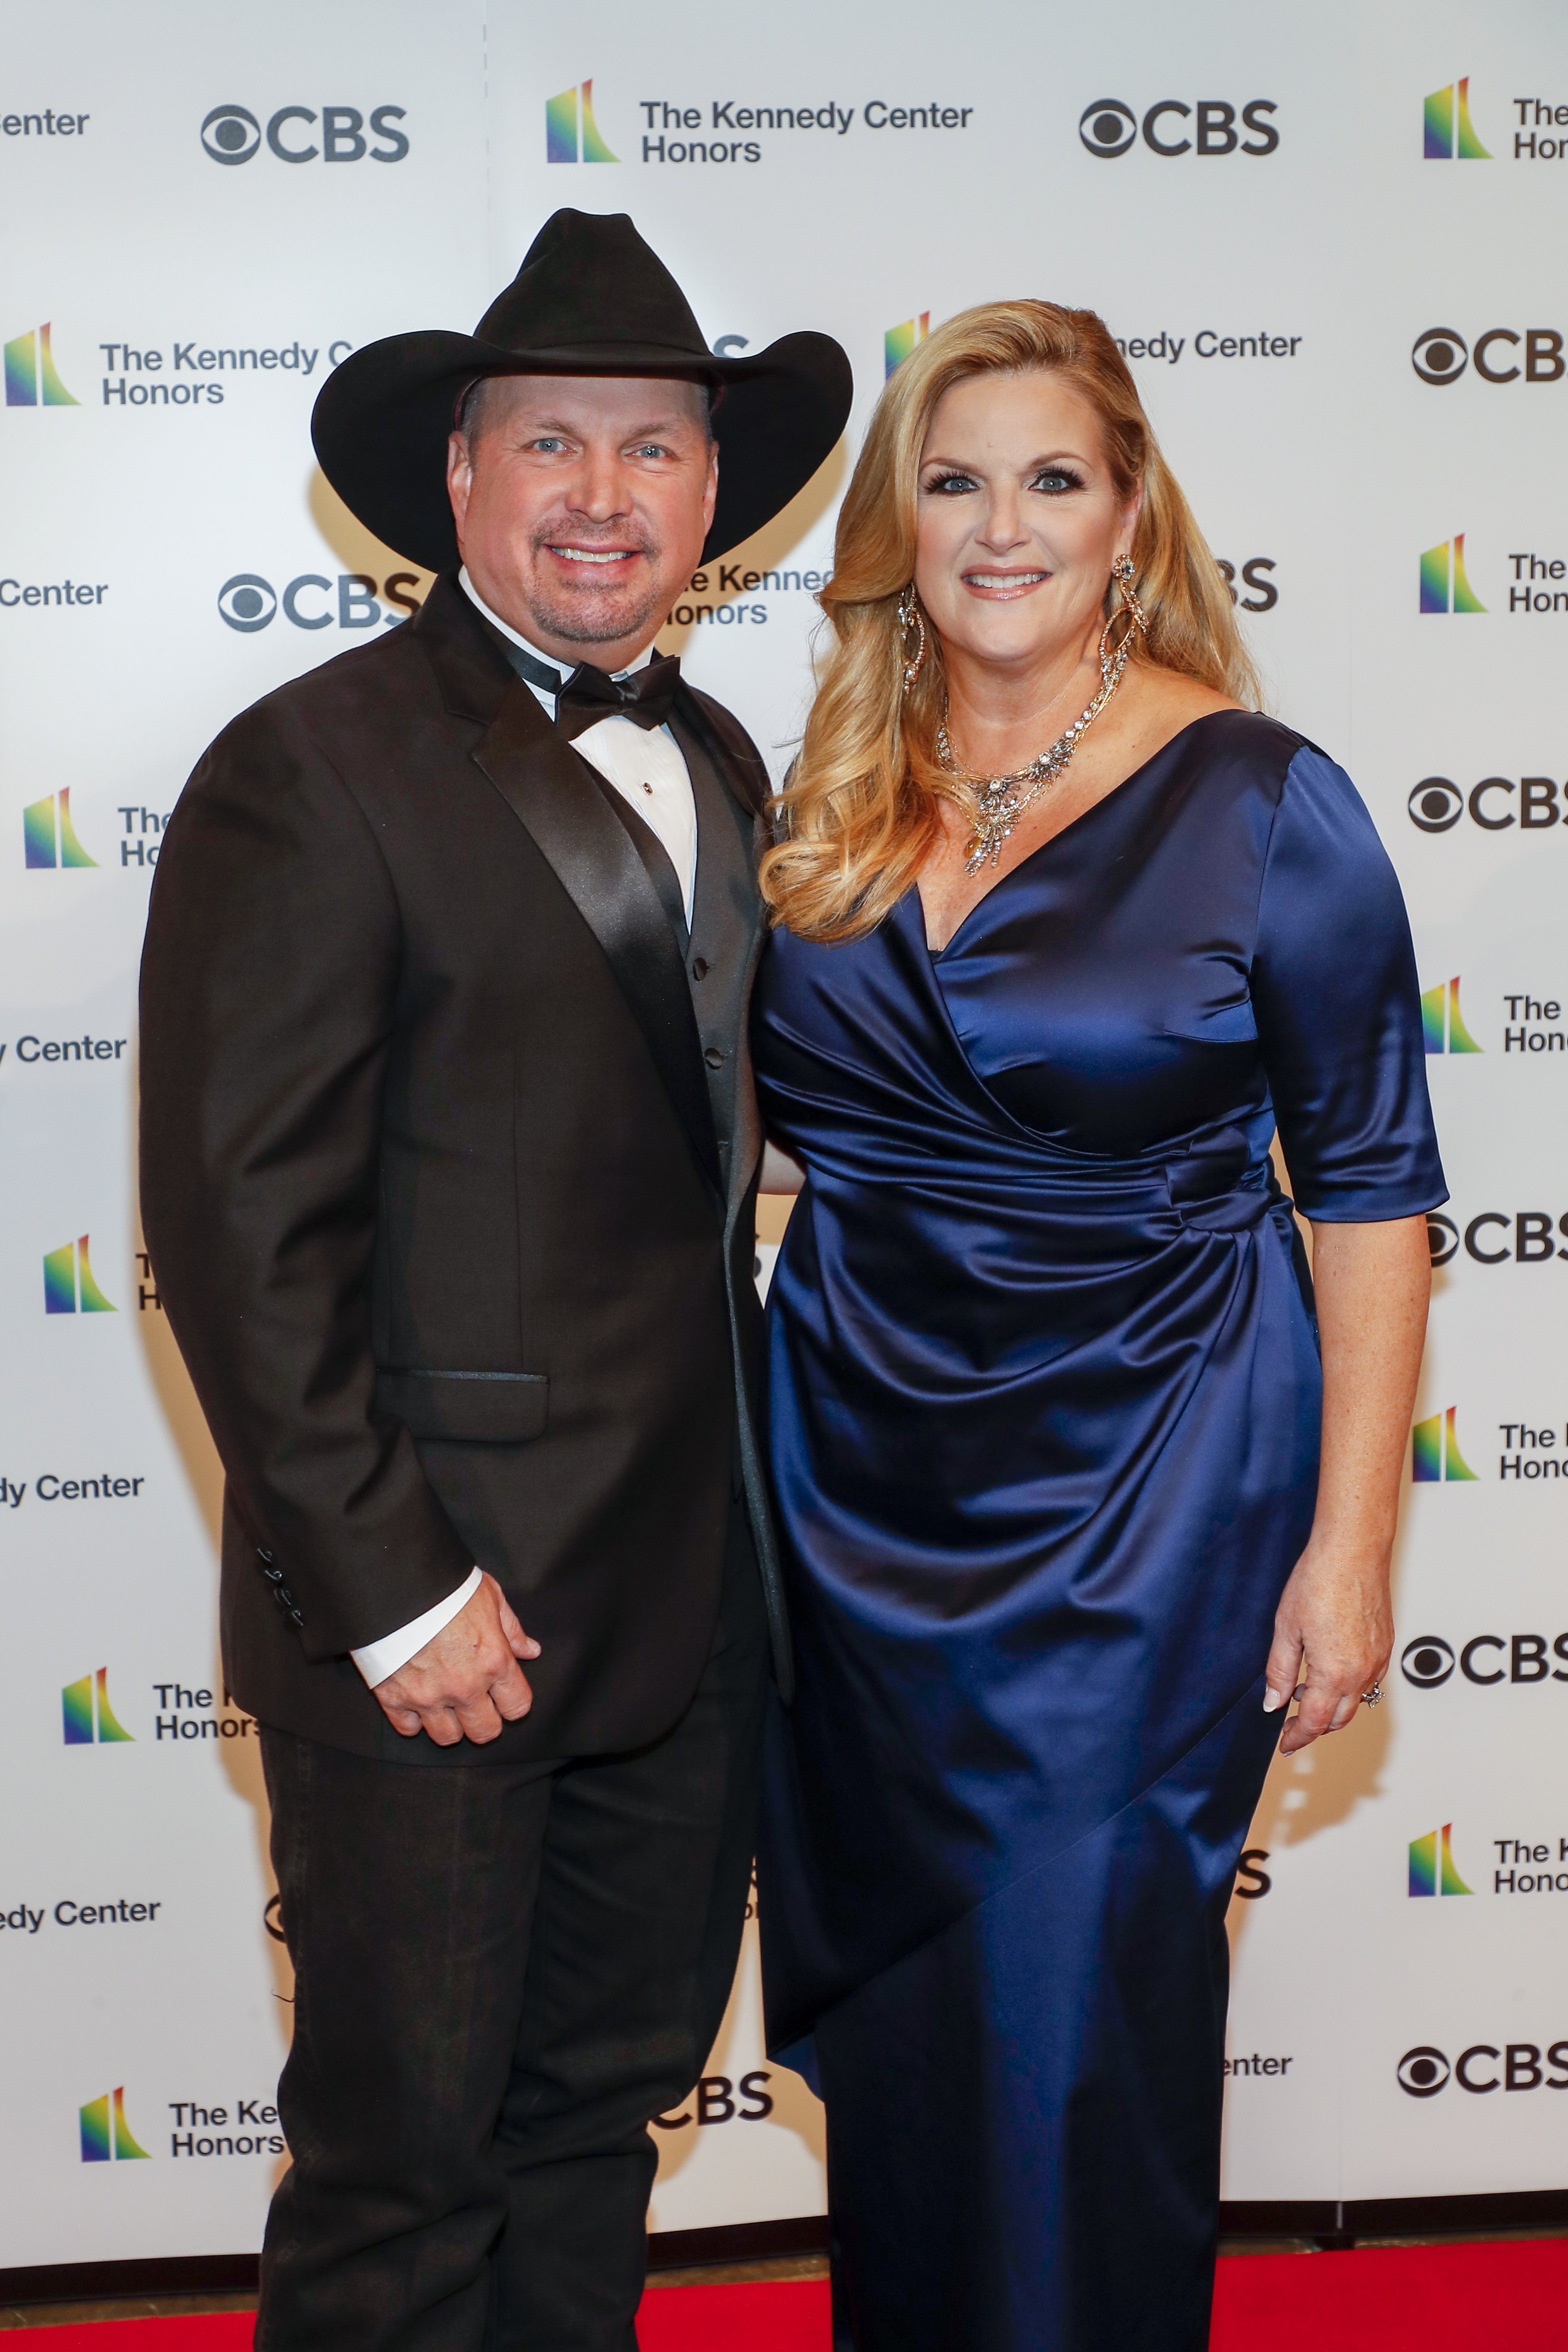 Garth Brooks and Trisha Yearwood attend the 43rd Annual Kennedy Center Honors at The Kennedy Center on May 21, 2021 in Washington, DC. | Source: Getty Images